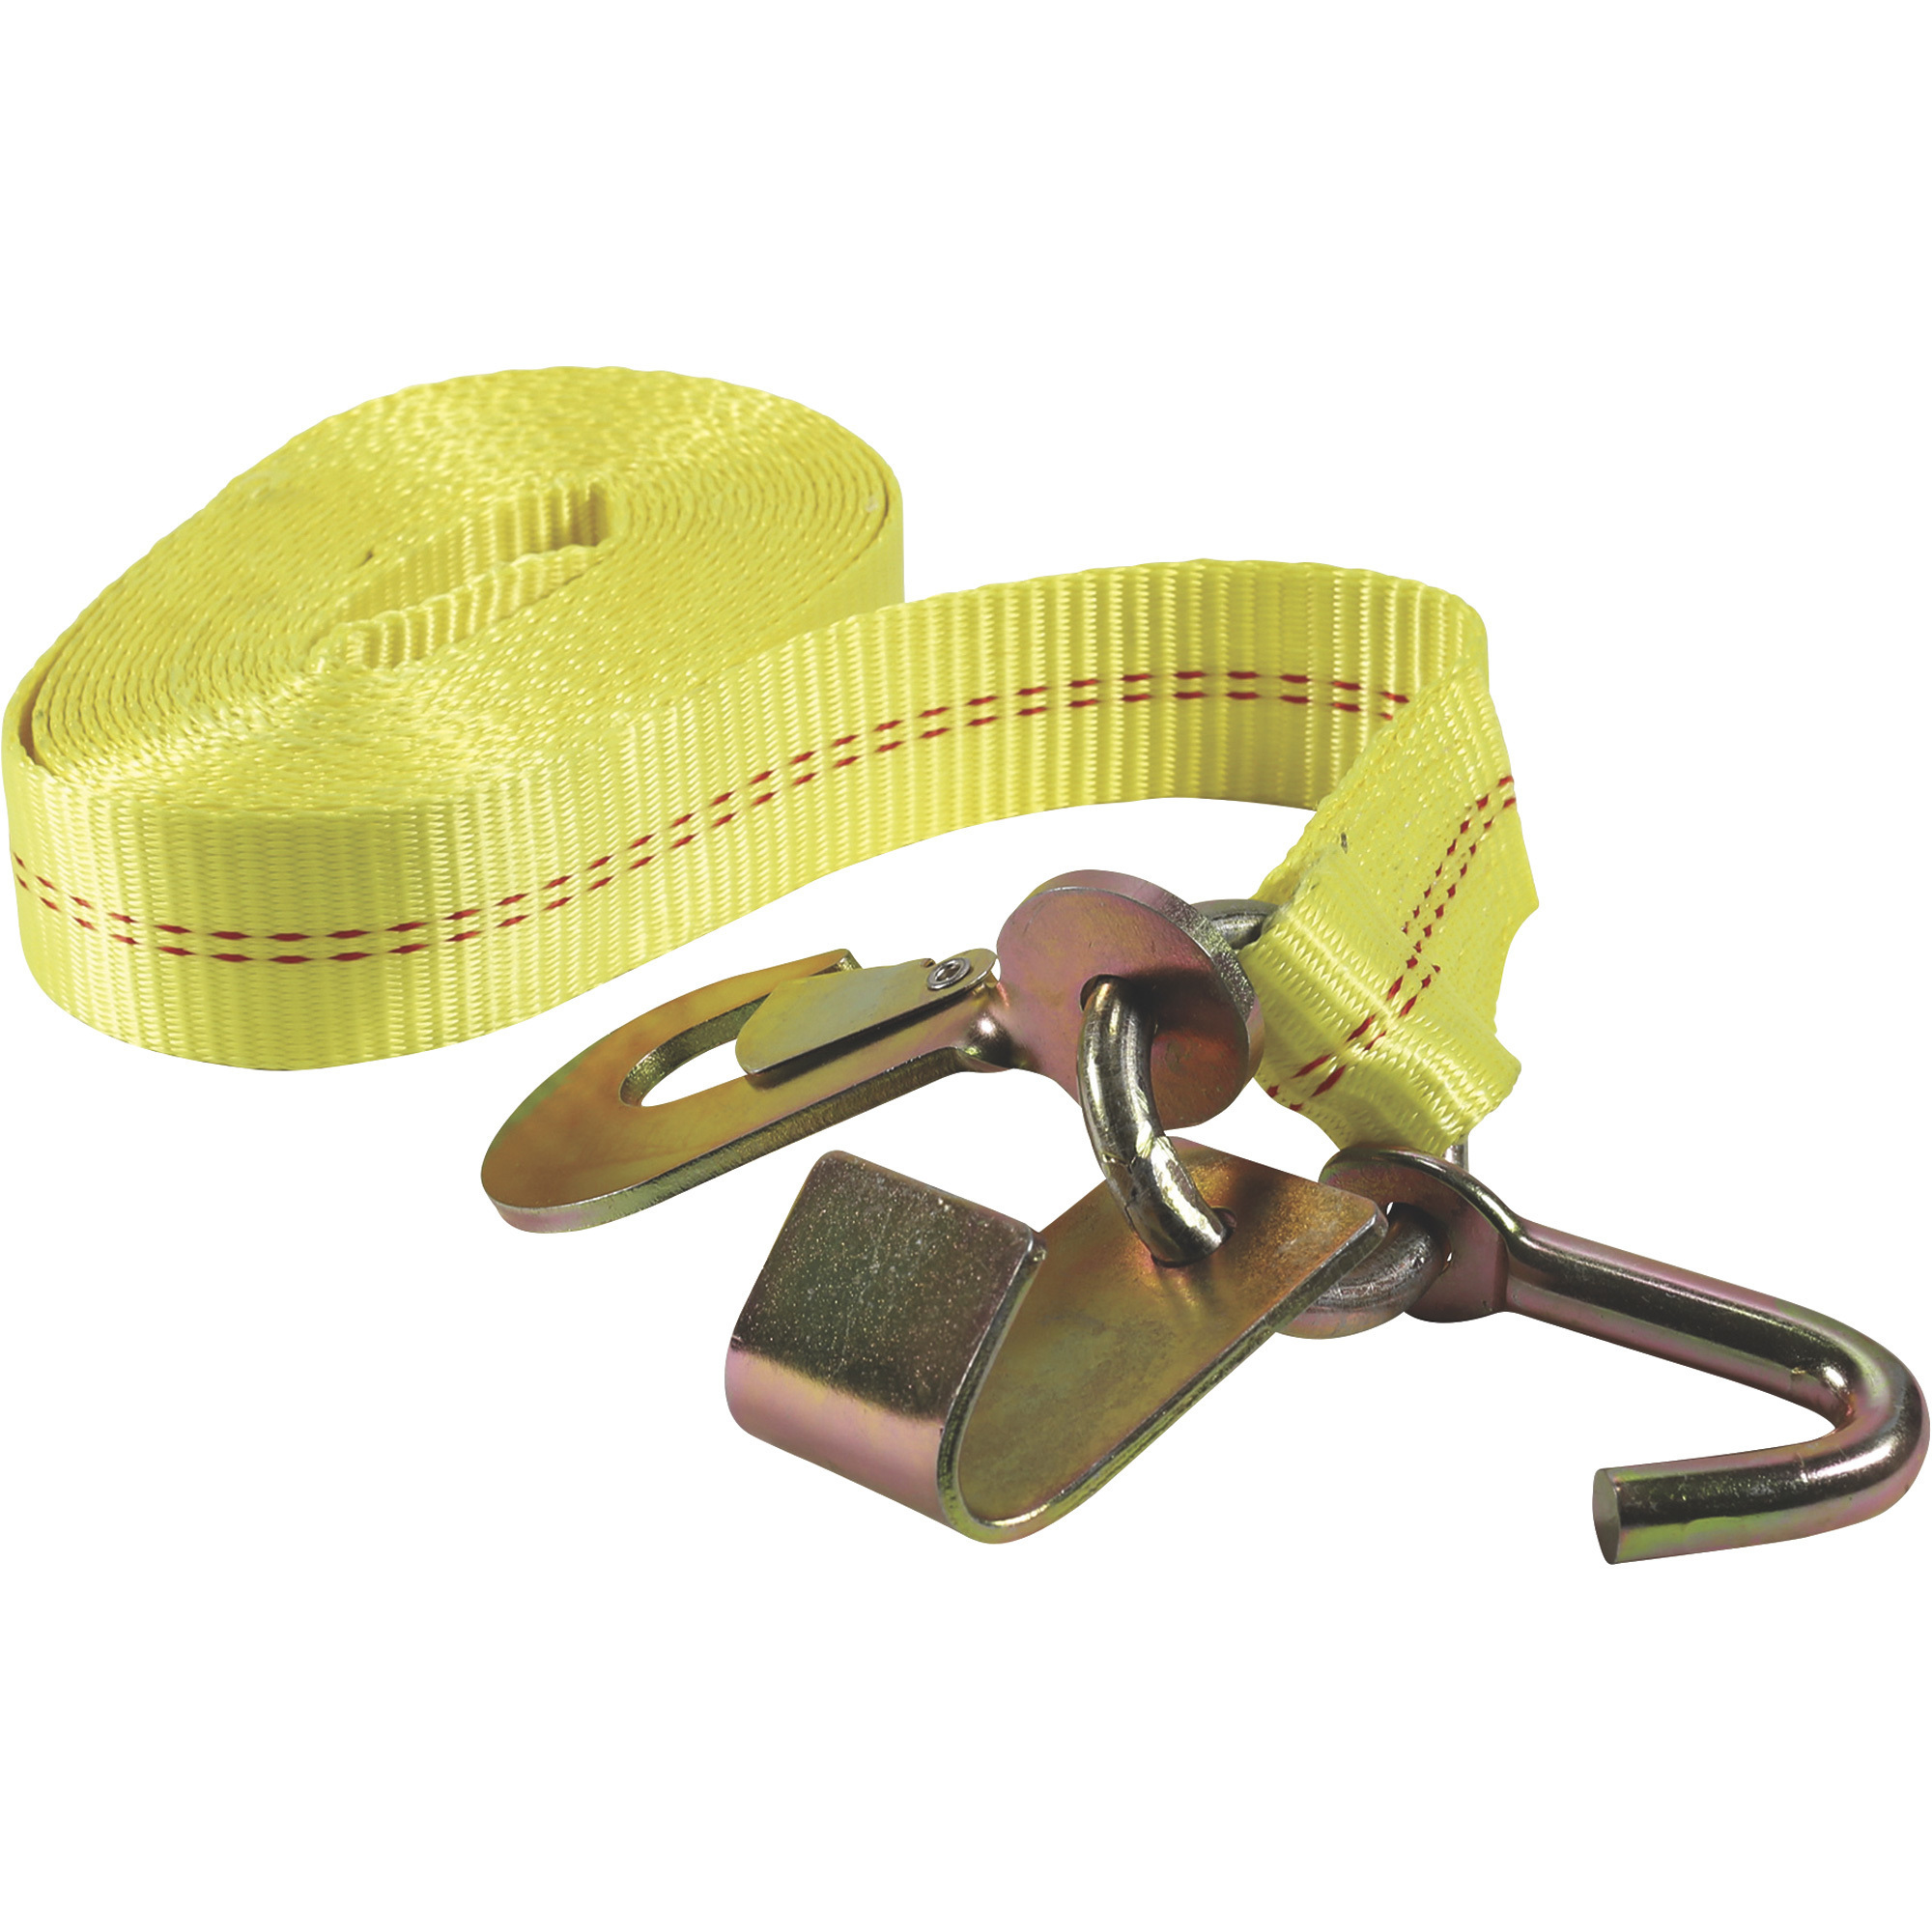 SmartStraps Ratchet Tie-Down Strap, 2Inch x 27ft., with Cluster Hooks, 10,000-Lb. Breaking Strength, Model 4552